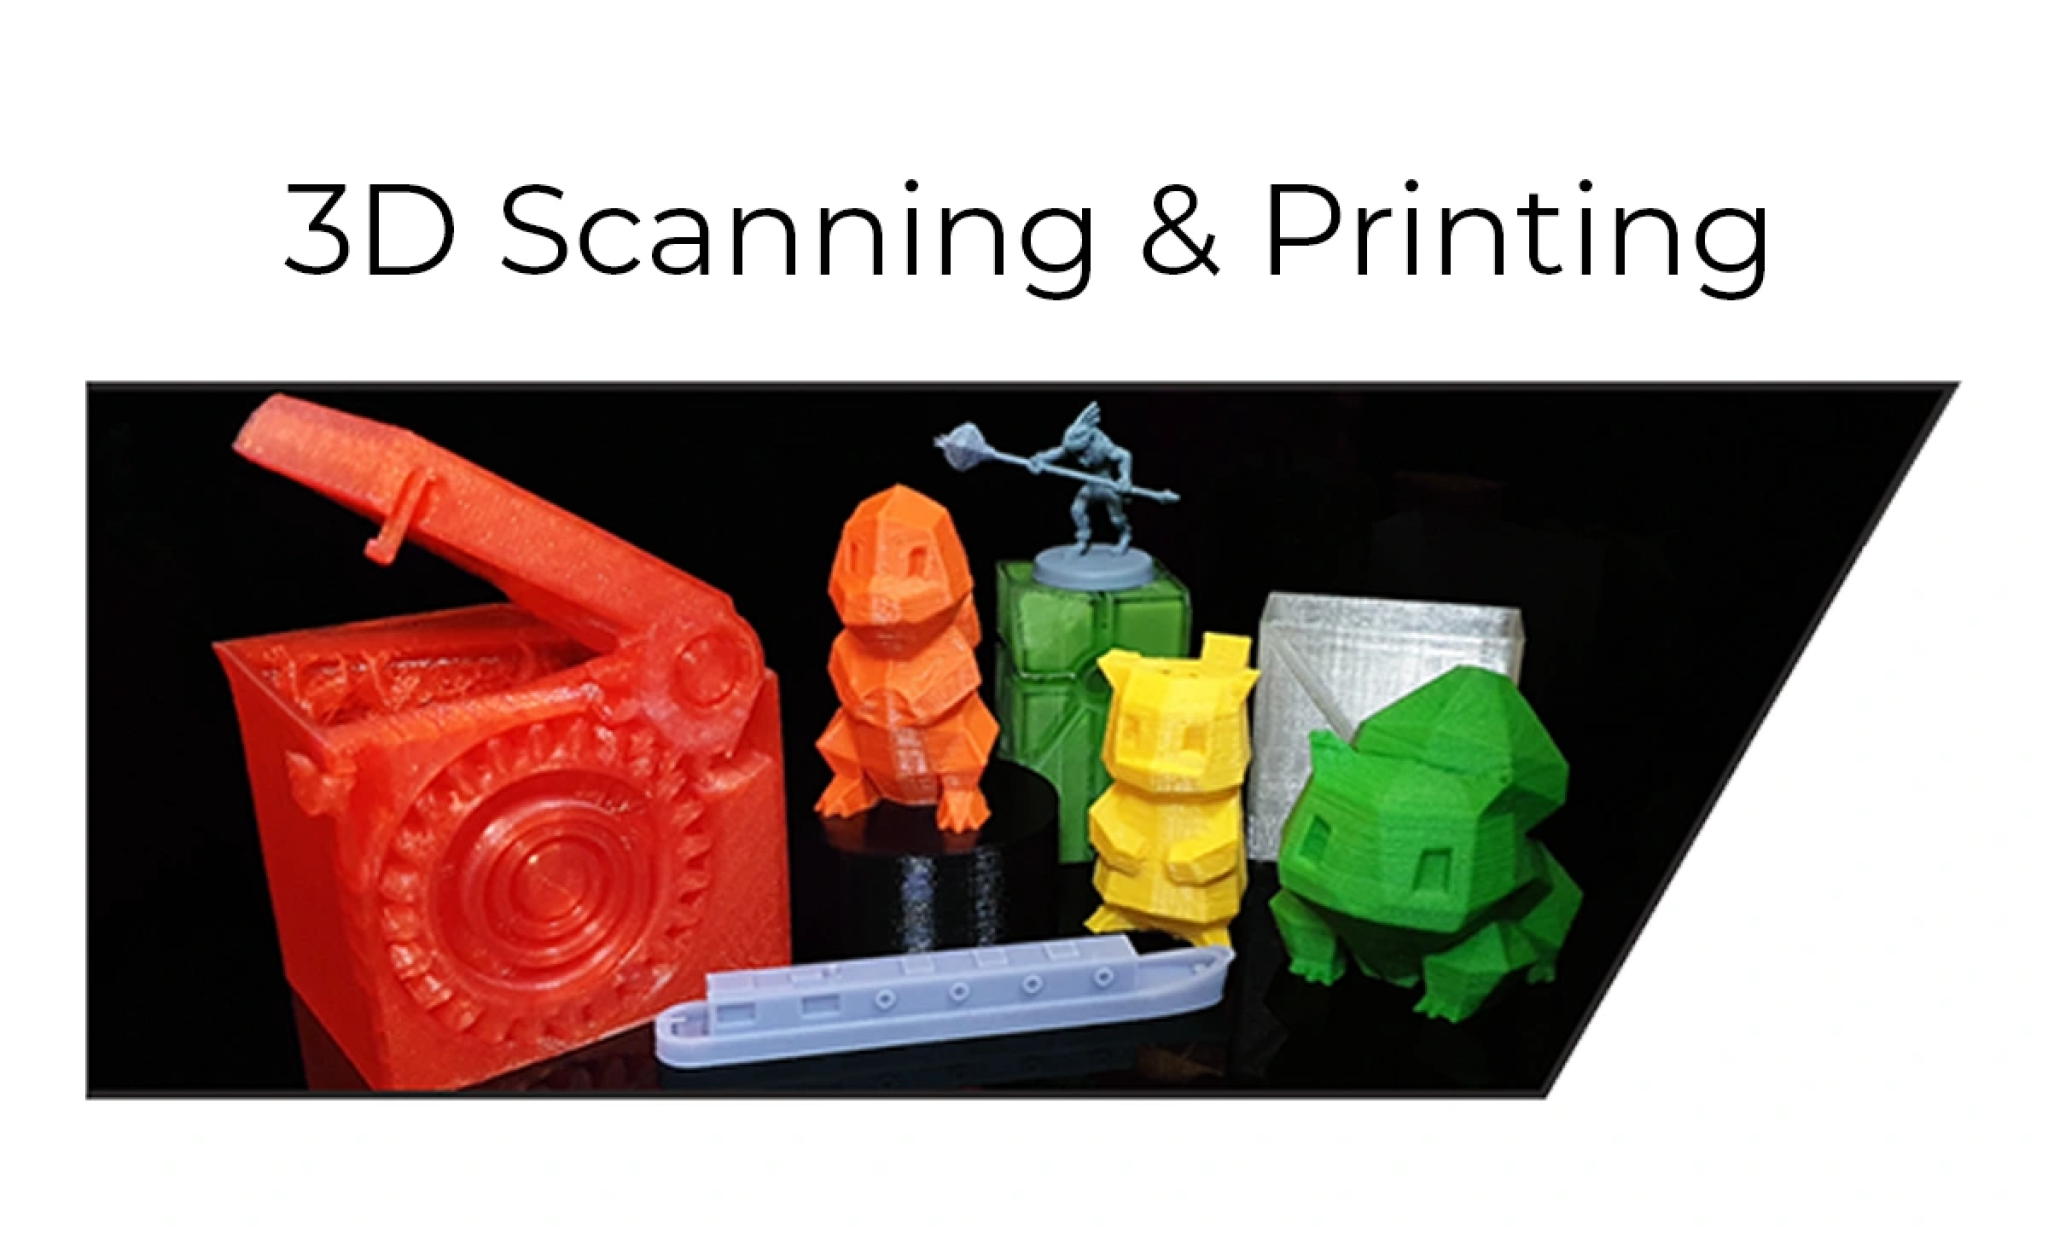 3D scanning and printing mobile compressed.png